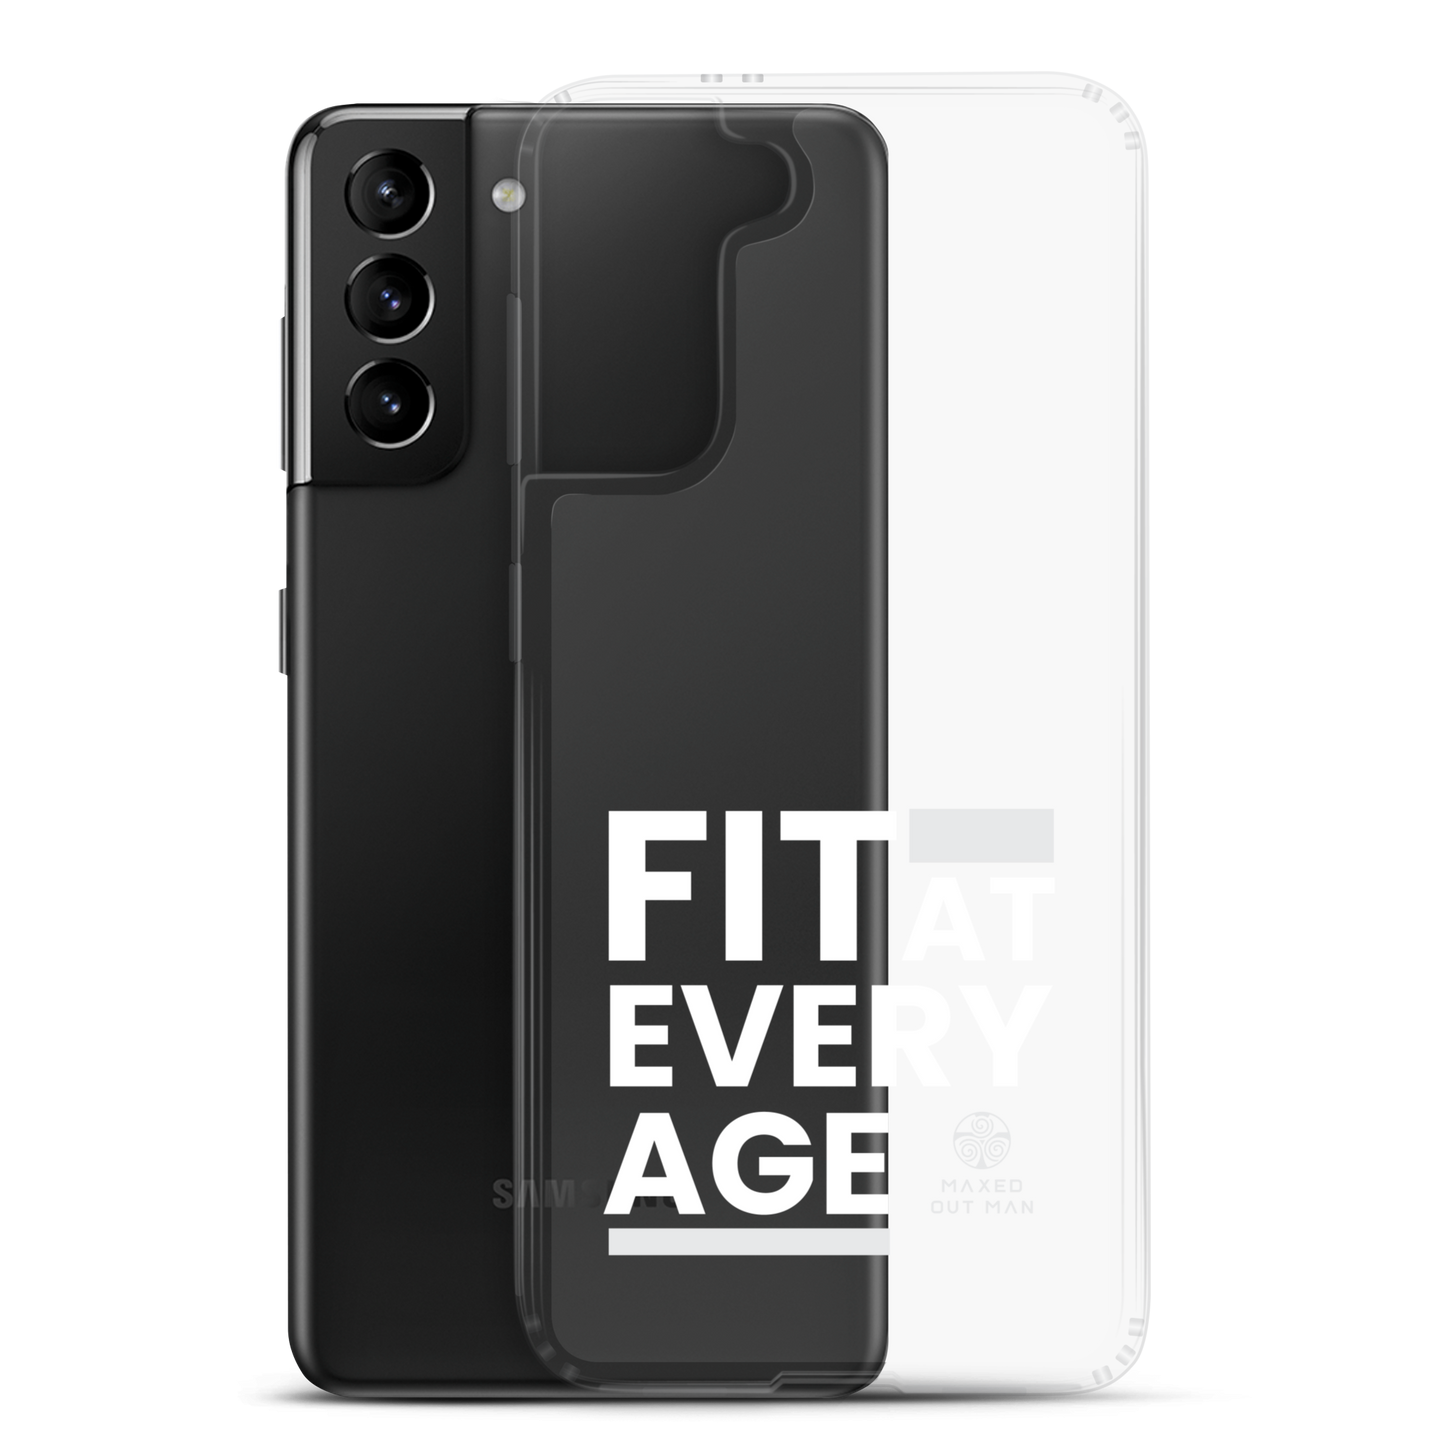 Fit at Every Age Samsung Phone Case